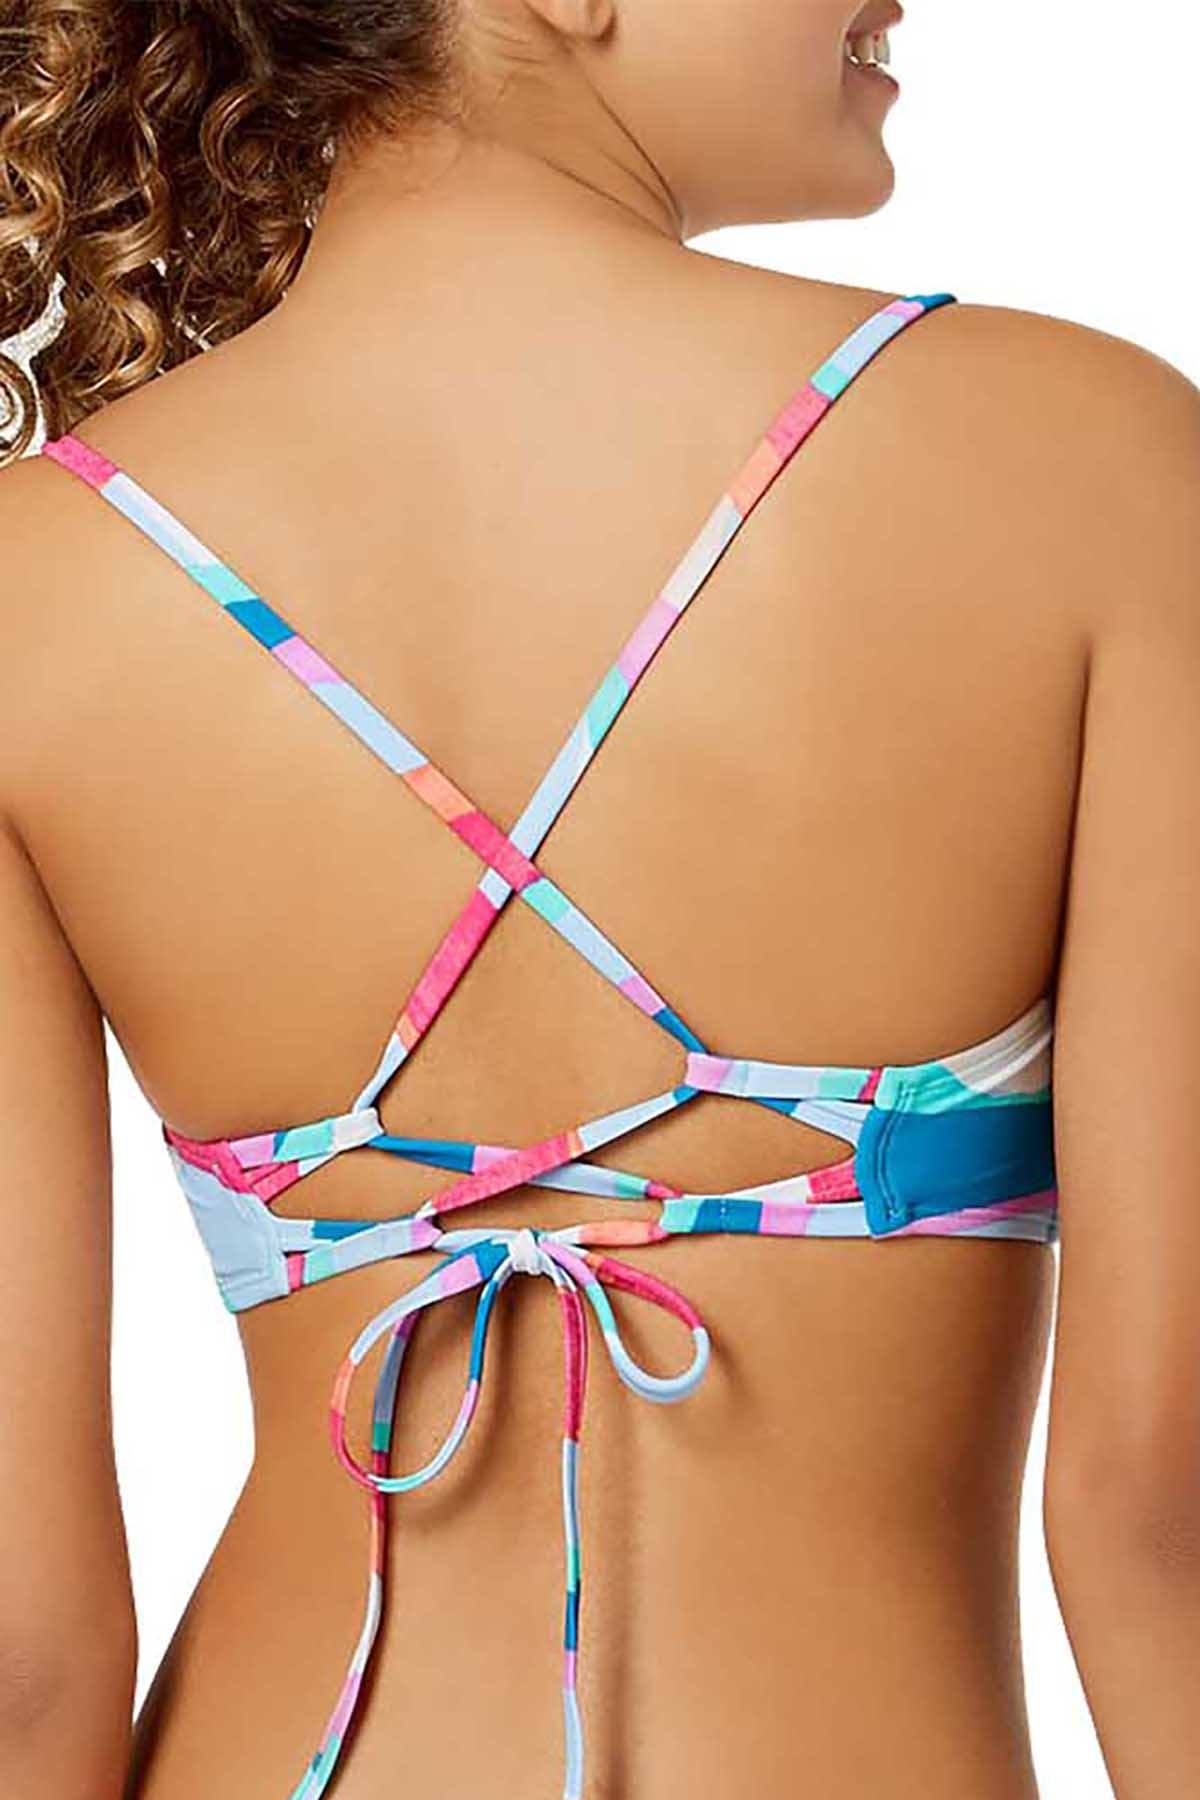 Hula Honey Flying Colors Printed Strappy Back Bikini Top in Multicolor